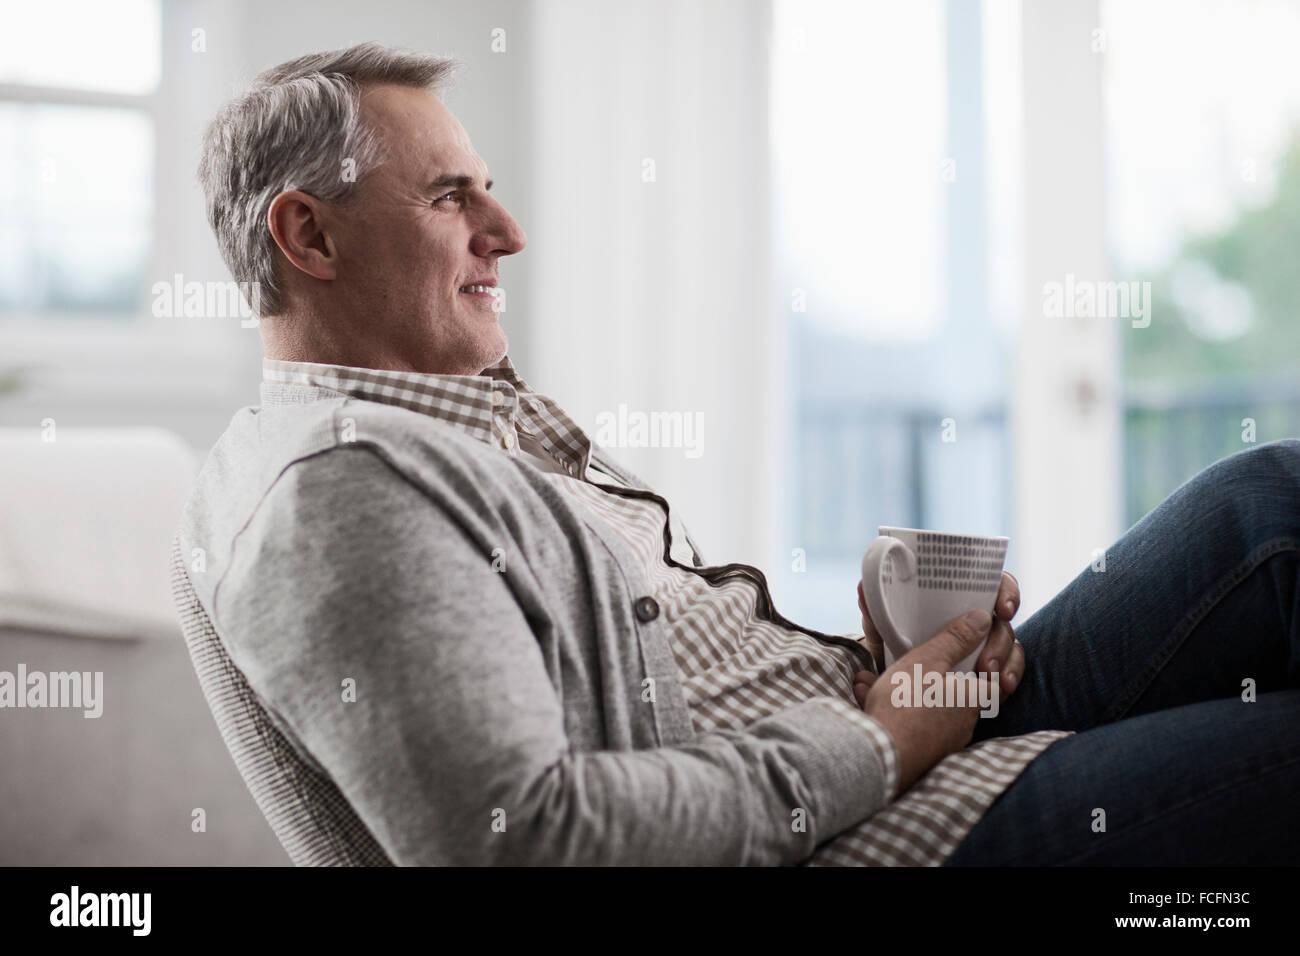 A mature man with grey hair leaning back in a chair, relaxing with a cup of tea or coffee. Stock Photo